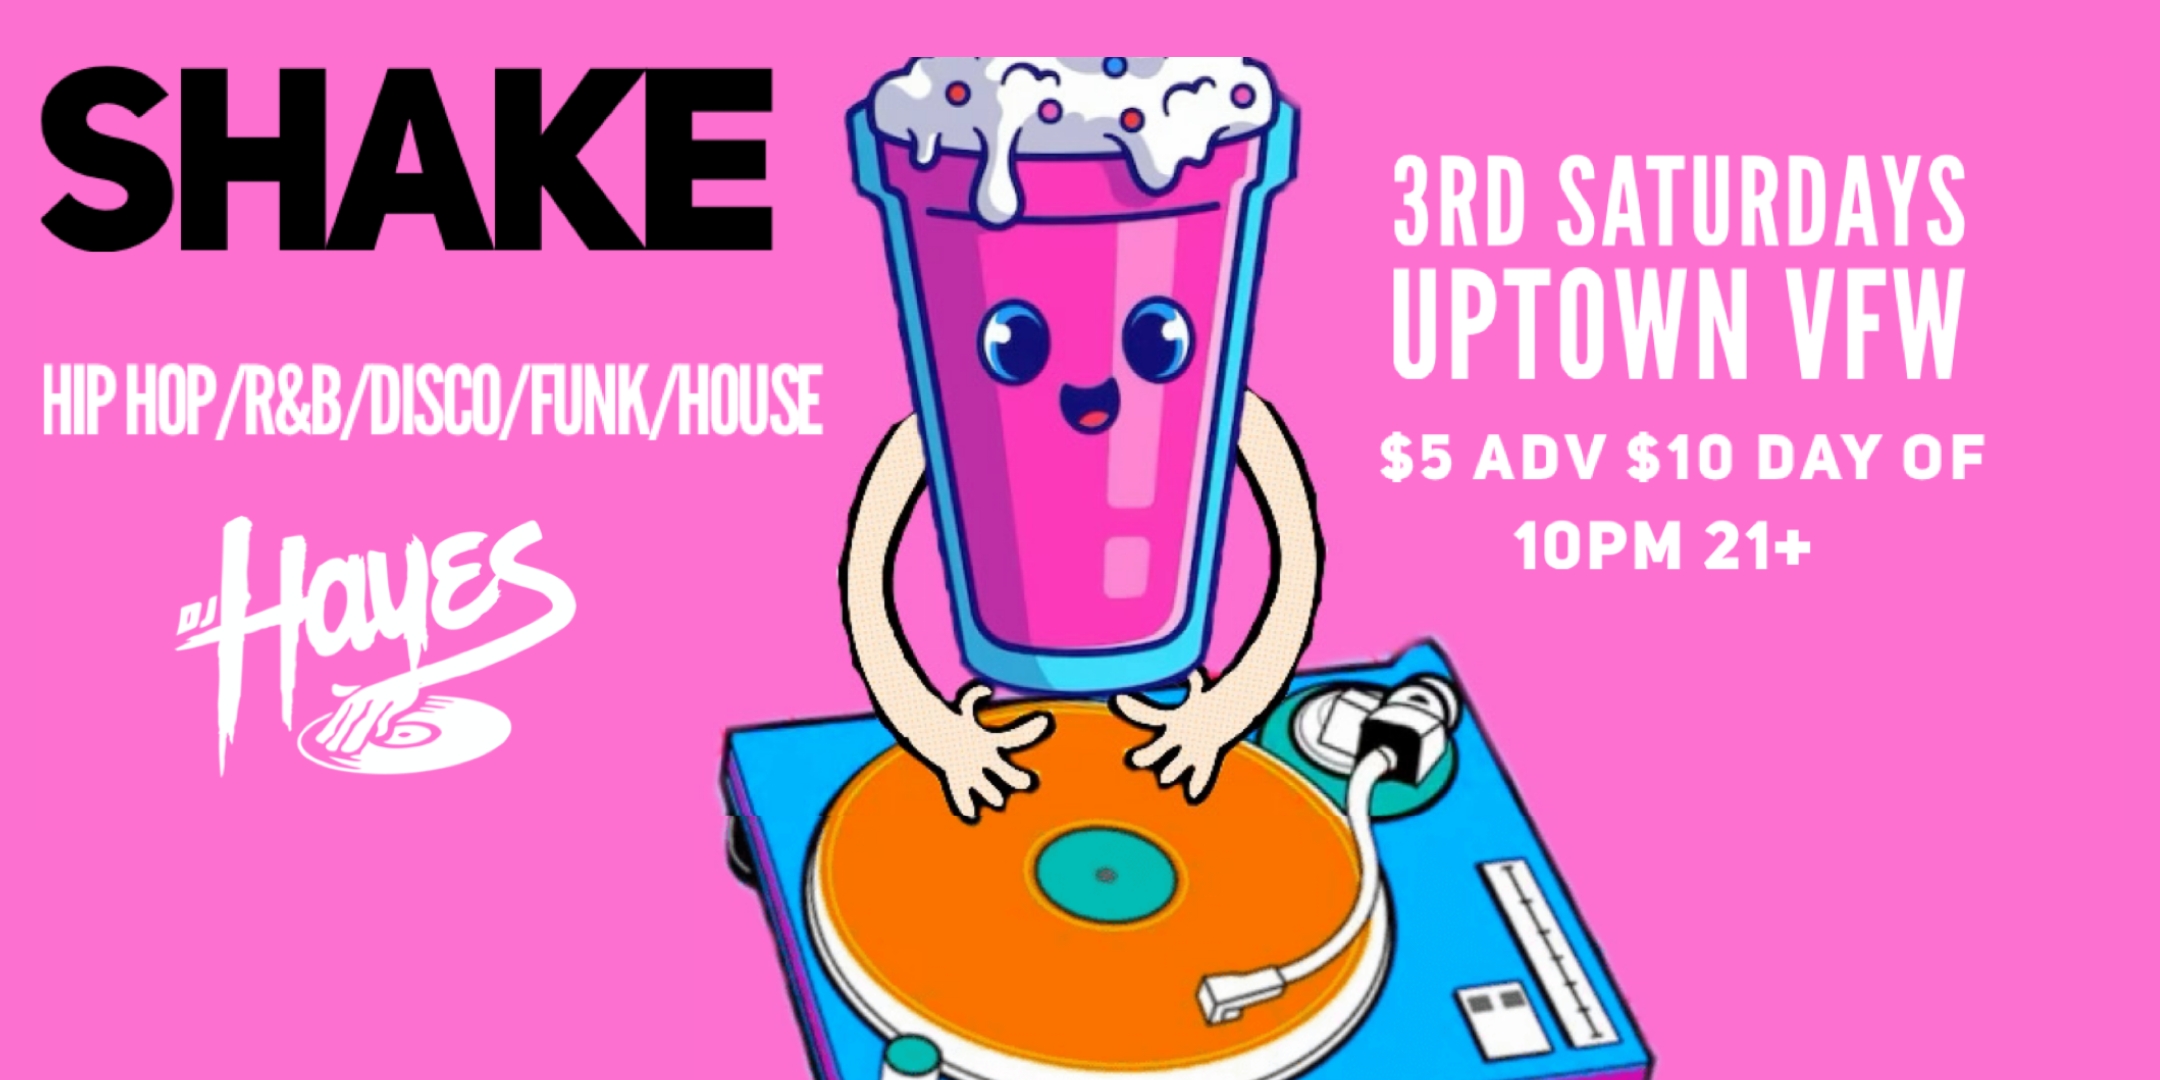 DJ Hayes Presents: Shake Hip Hop / R&B / Disco / Funk / House Saturday, July 20 James Ballentine "Uptown" VFW Post 246 Doors 10:00pm :: Music 10:00pm :: 21+ $5 ADV / $10 DOS TICKETS ON SALE NOW